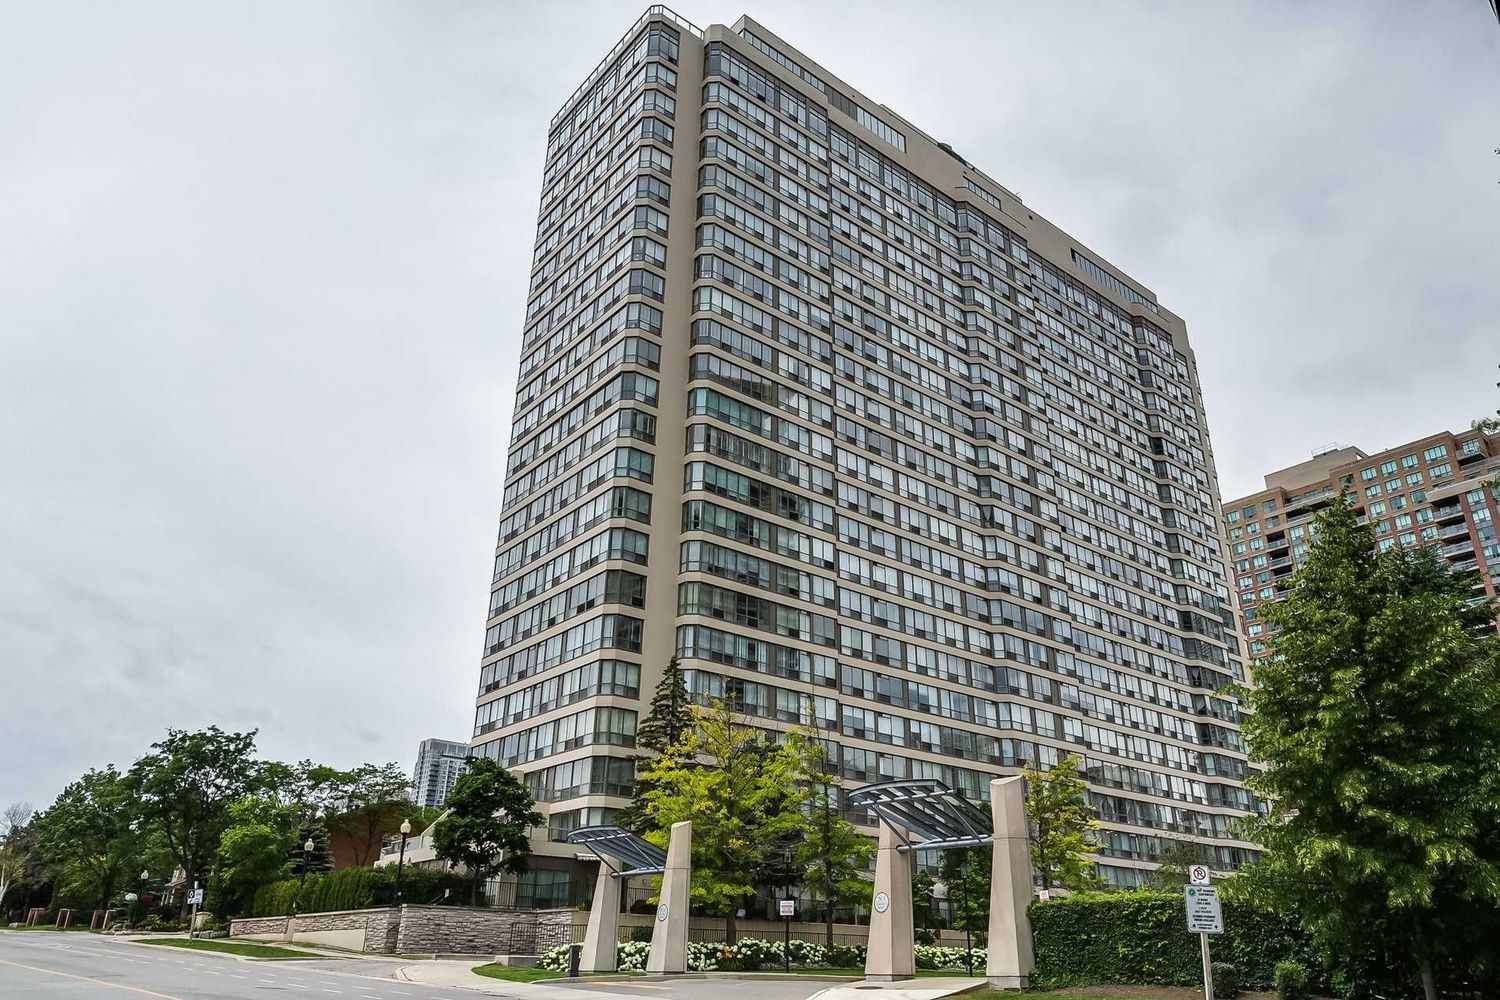 55 Elm Drive W. Towne Two Condos is located in  Mississauga, Toronto - image #1 of 2